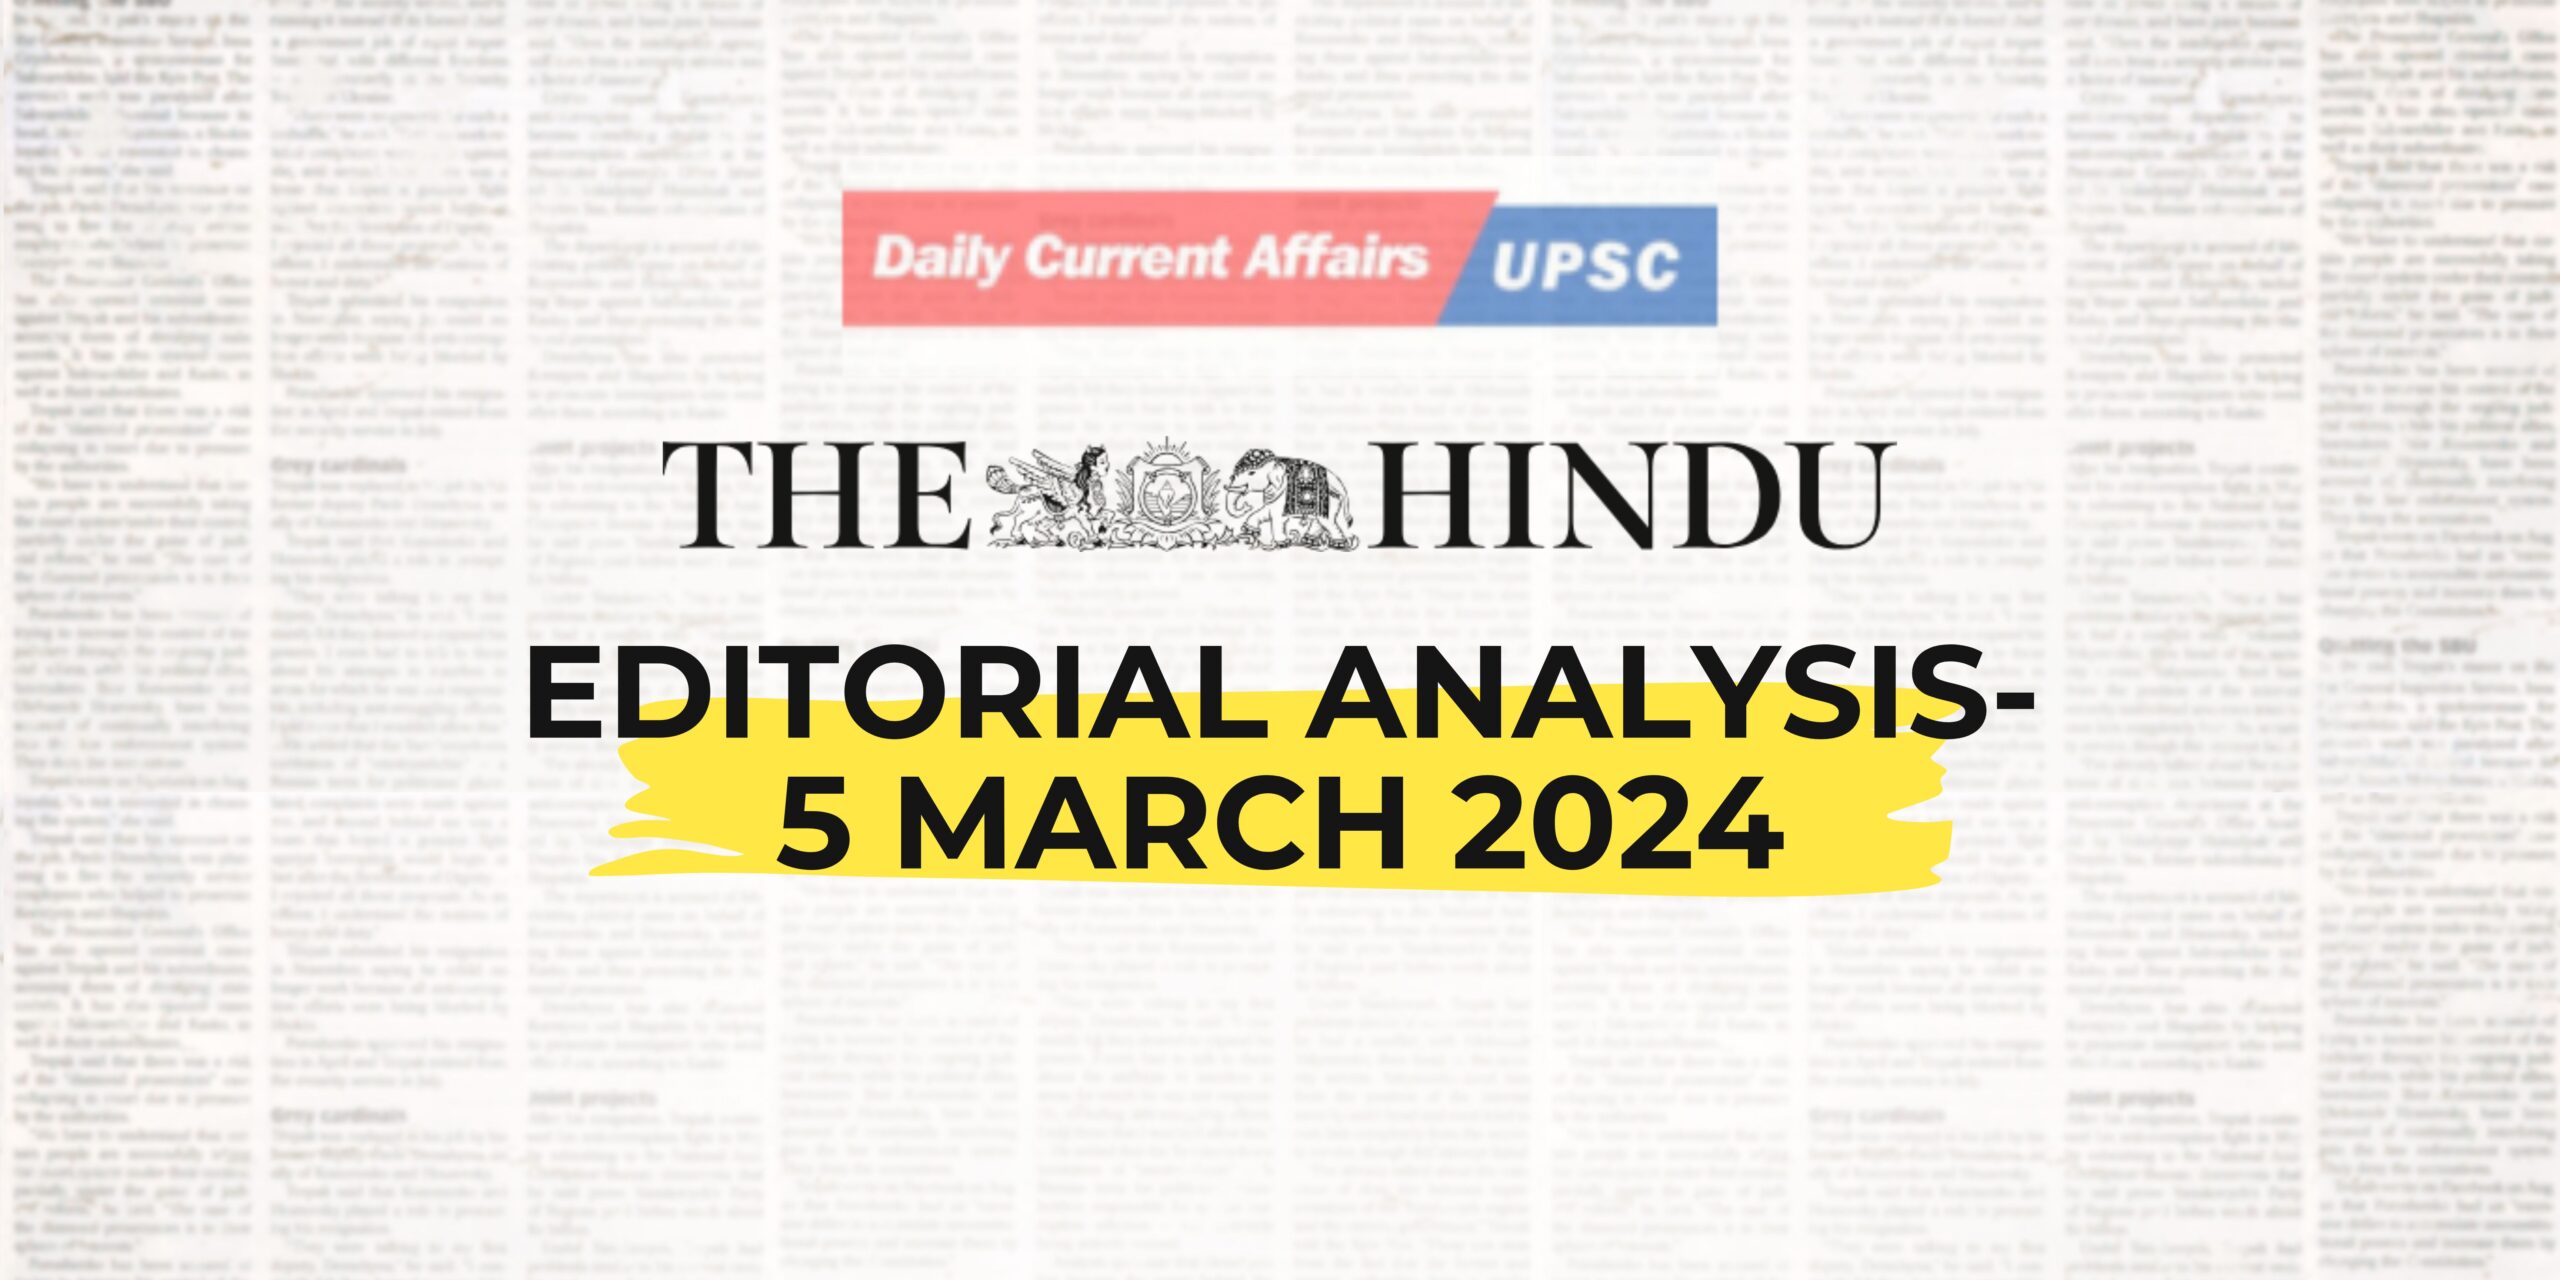 The Hindu Editorial Analysis- 5 March 2024